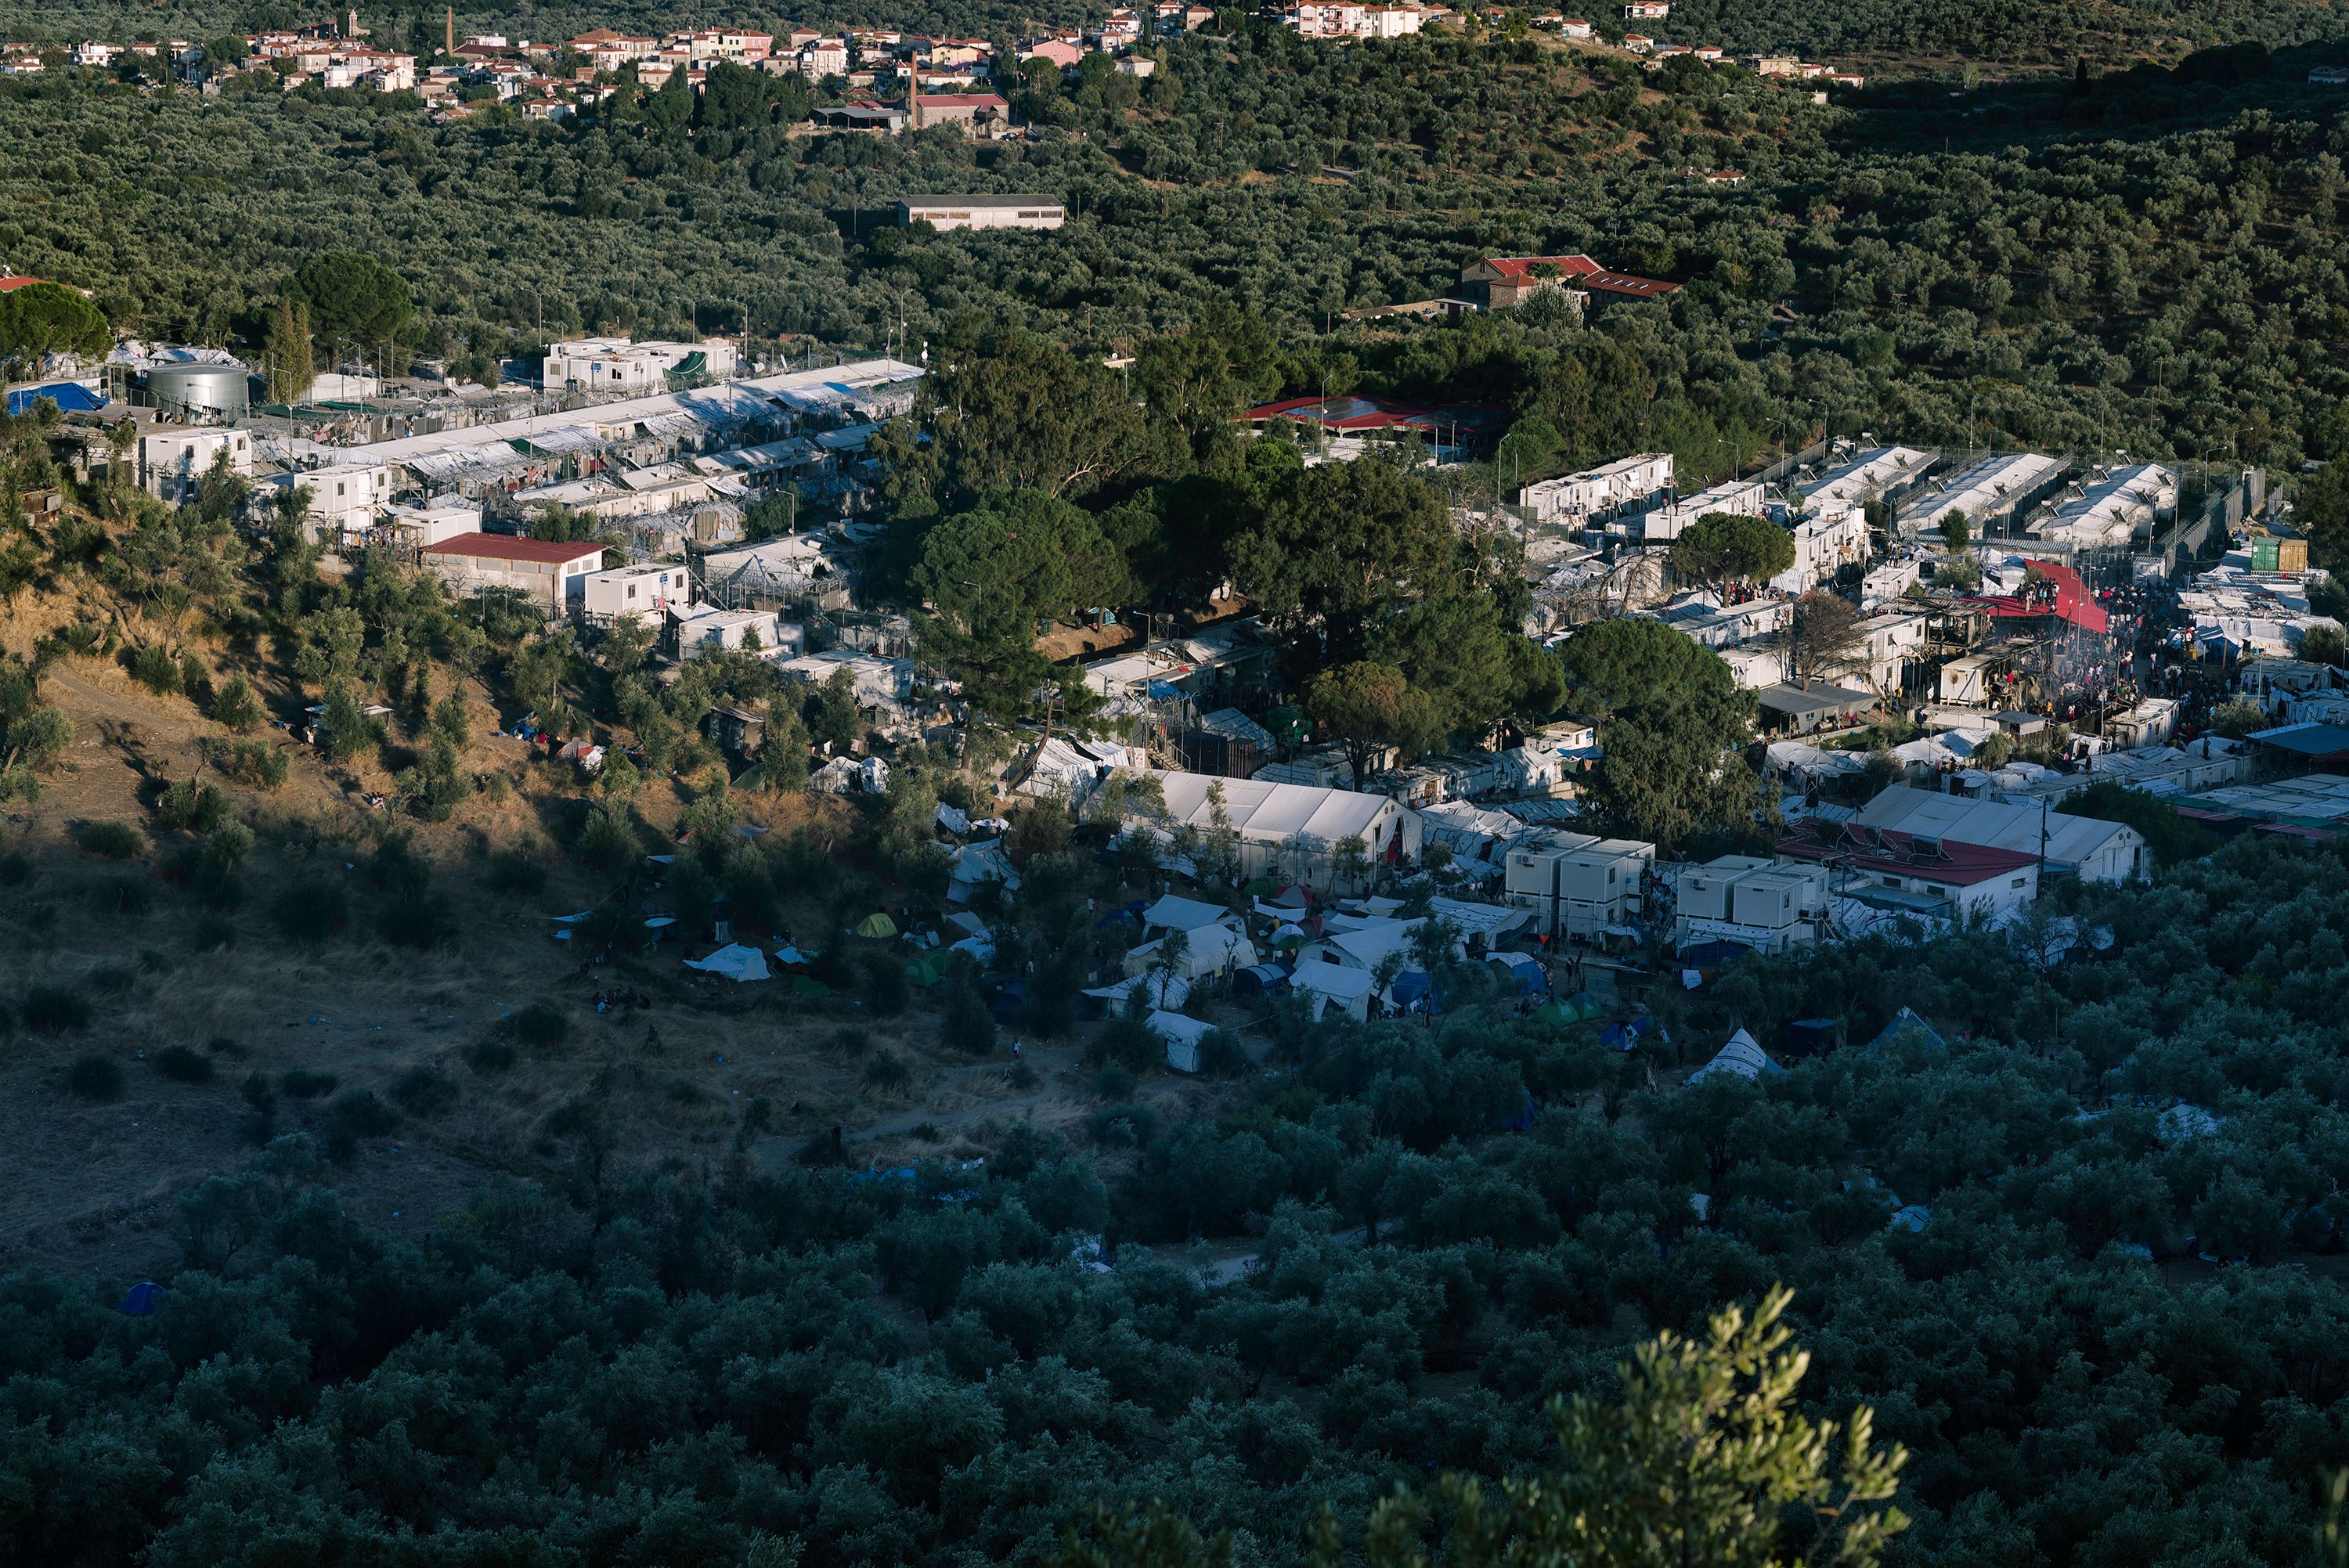 A view of the Moria refugee camp in September 2019. Thousands have been left homeless after a fire destroyed the camp. Image by Aleksandra H. Kossowska / Shutterstock. Greece, 2019.